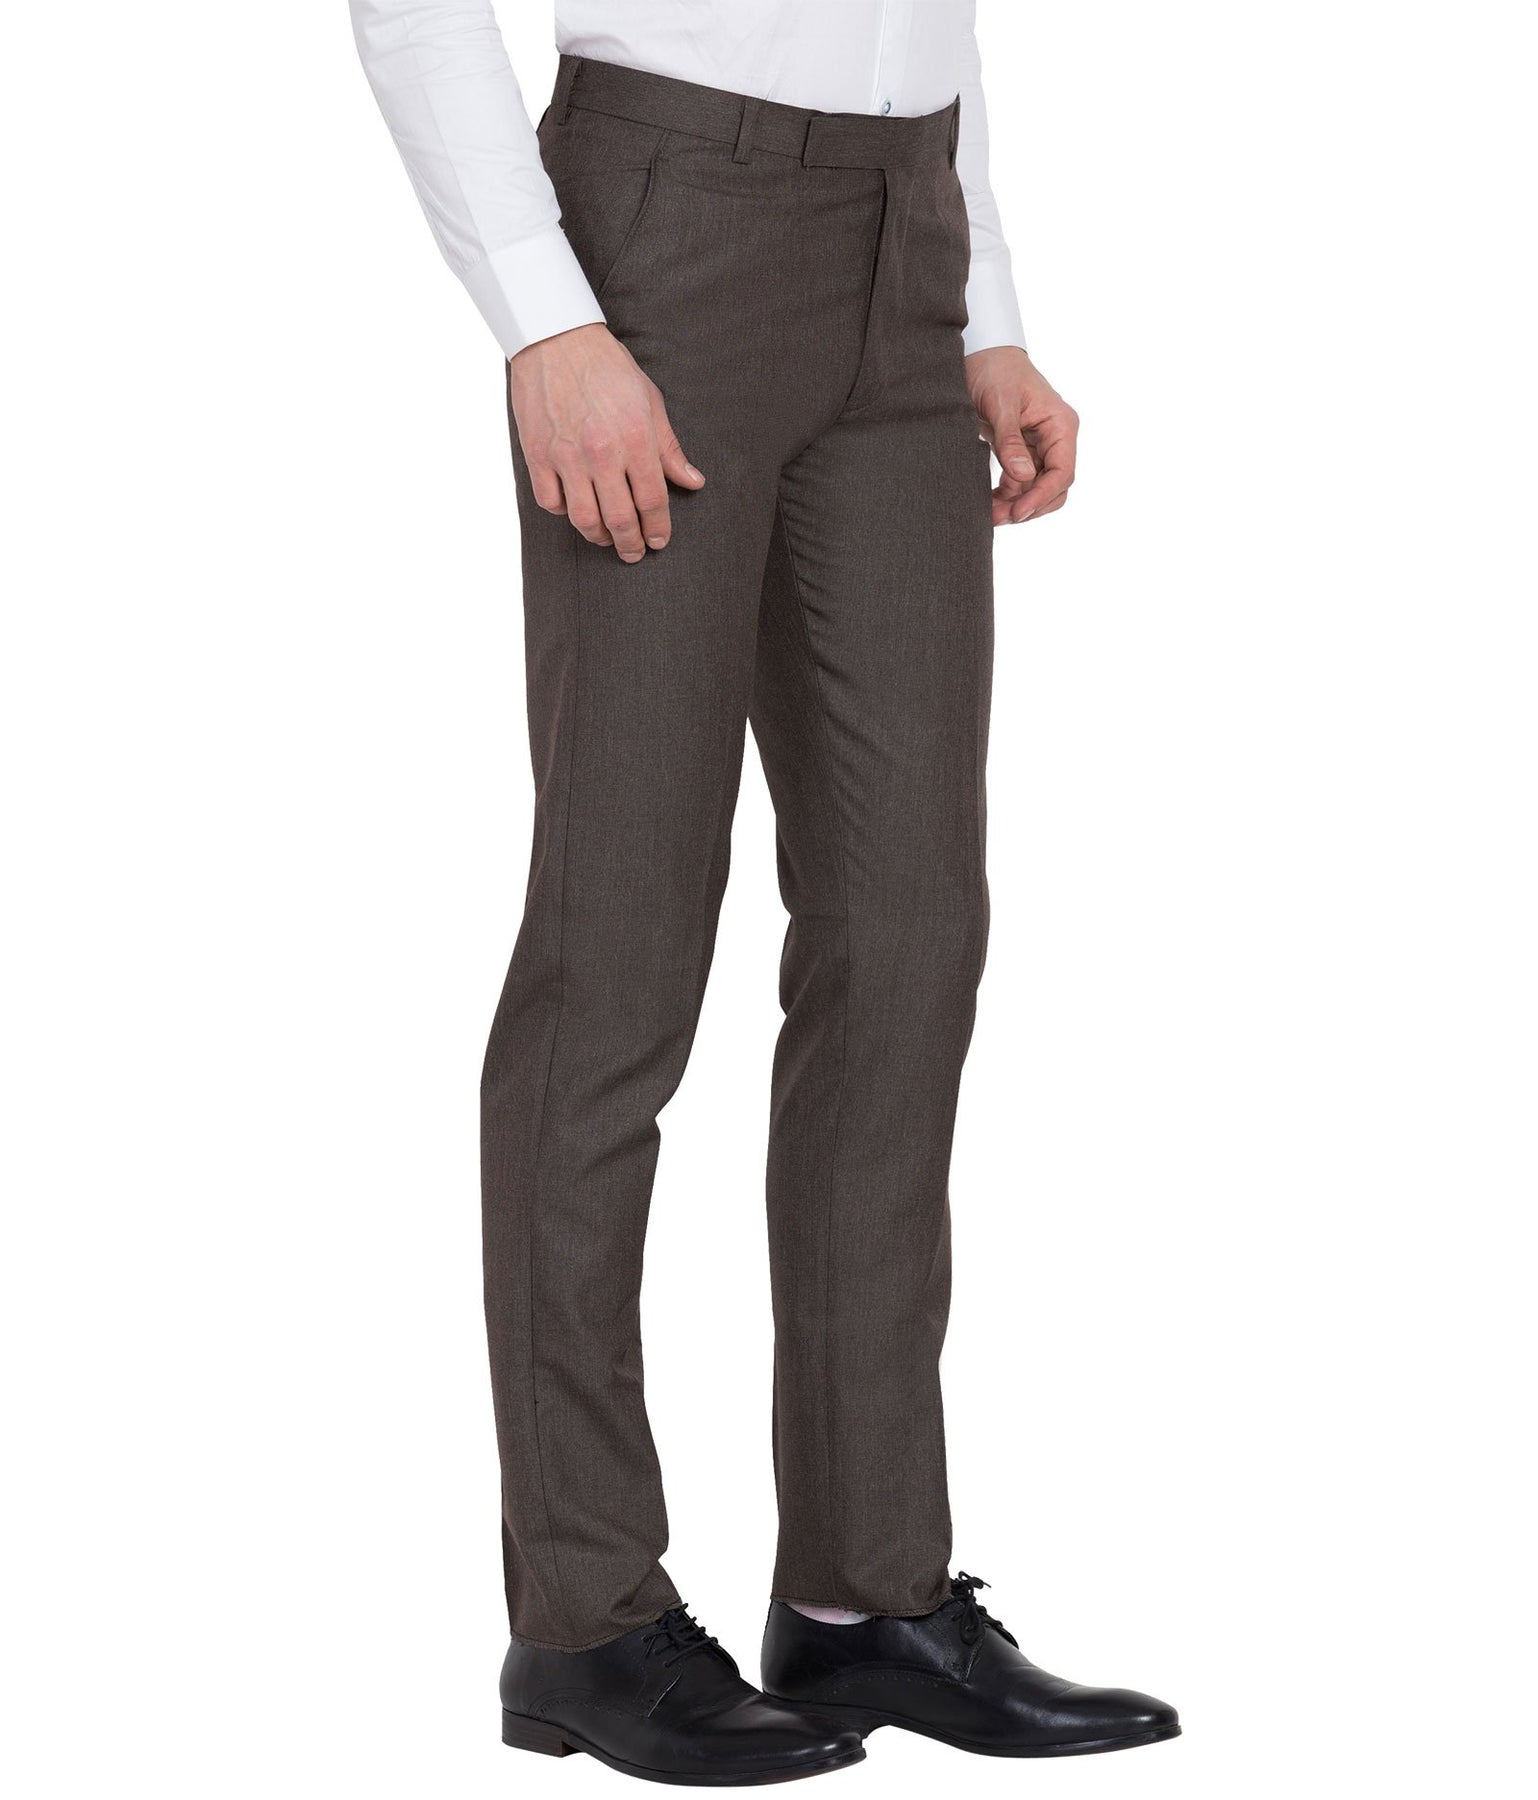 Cheap Men Fashion Solid Color Formal Trousers Casual Stretch Pencil Pants   Joom